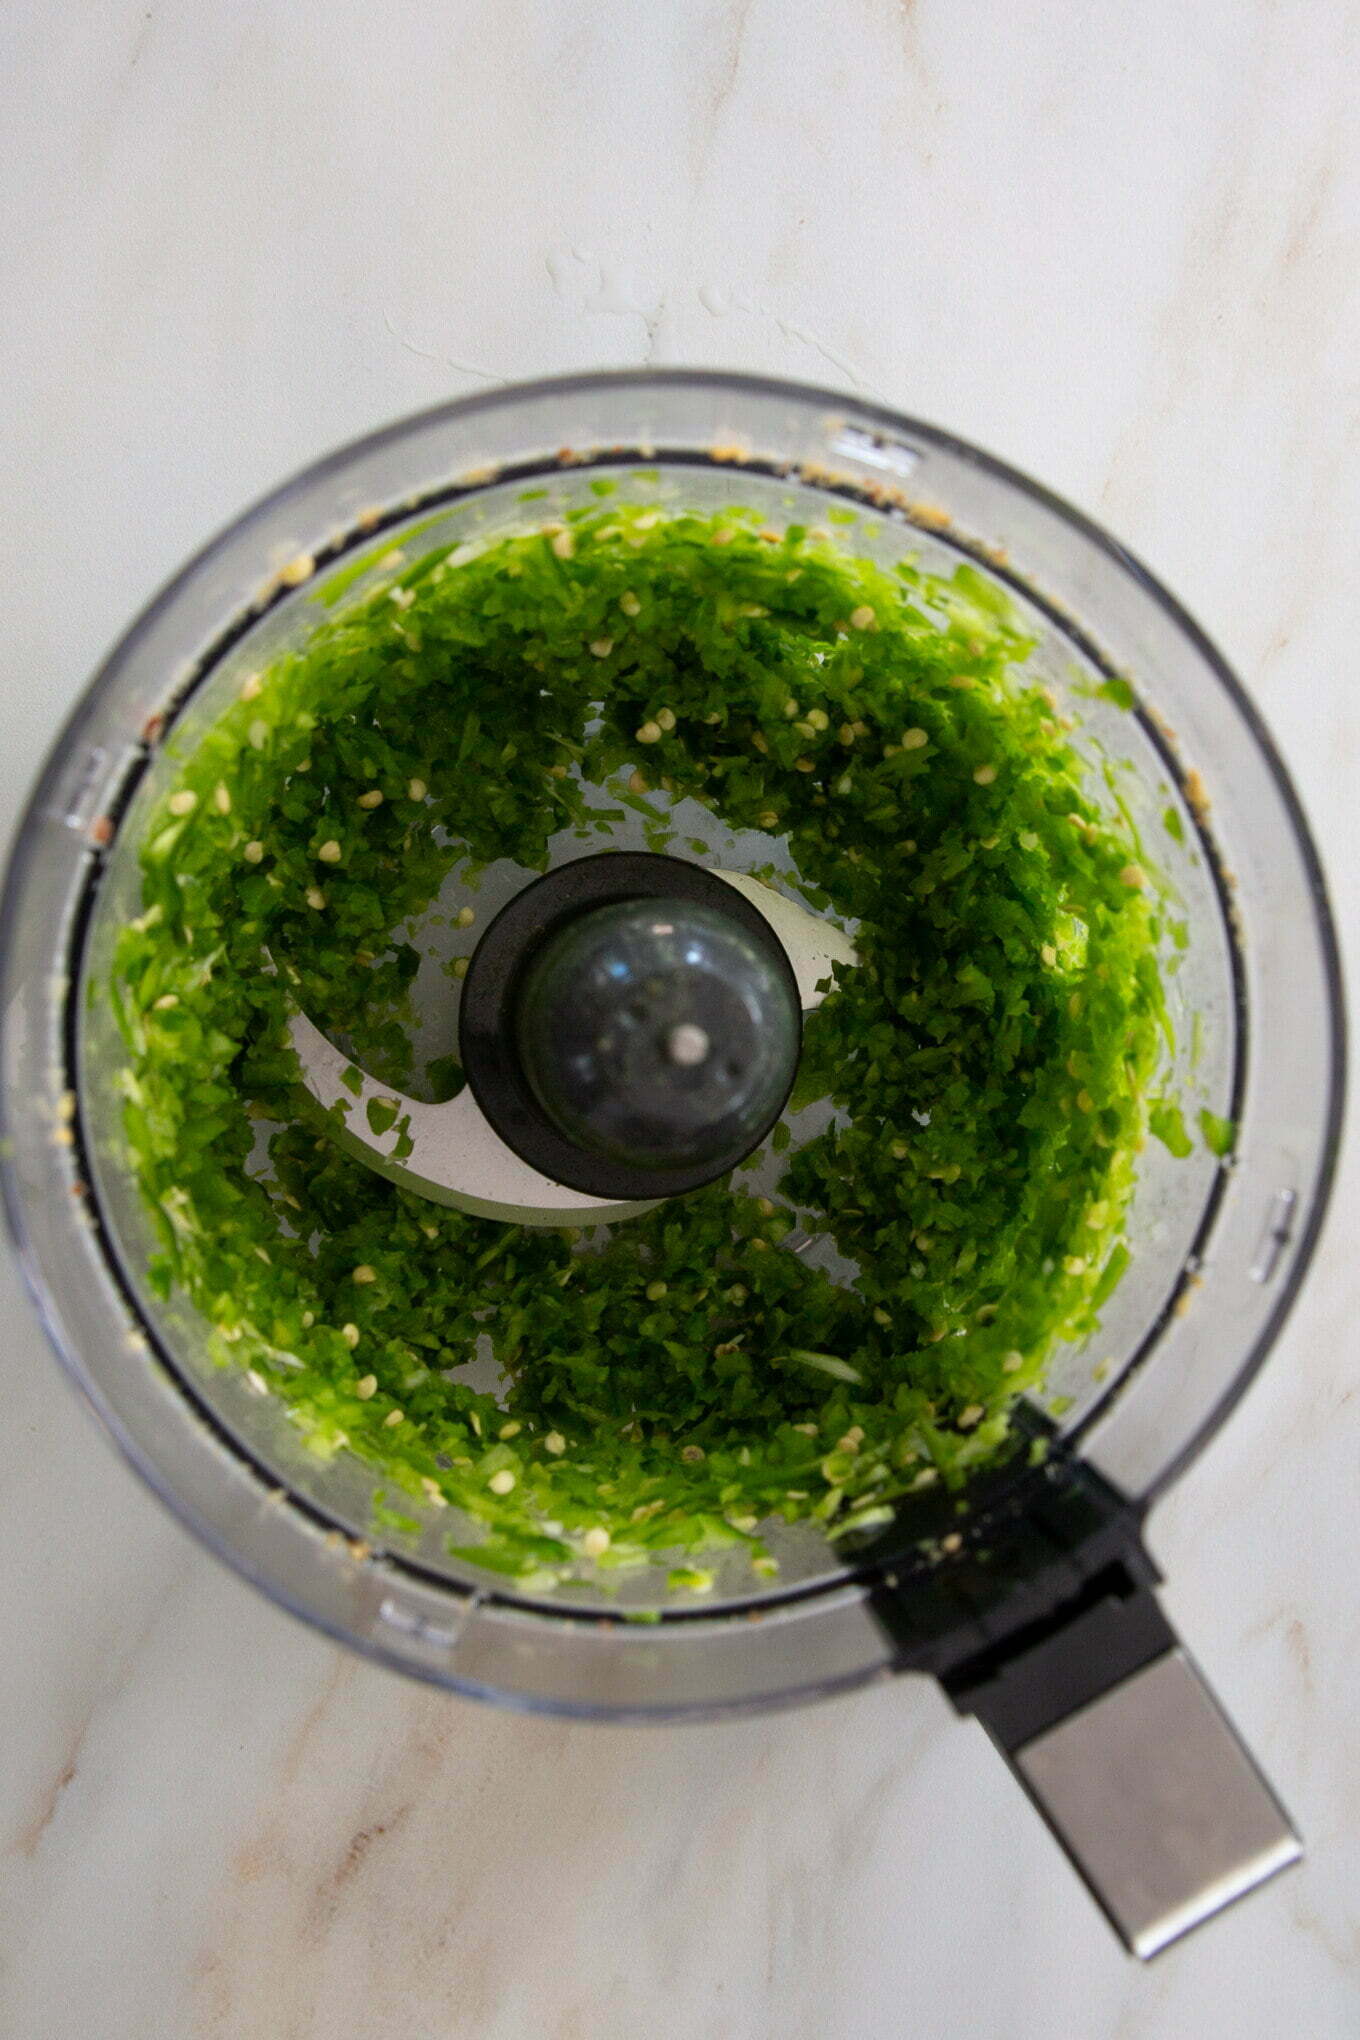 A food processor filled with greens.